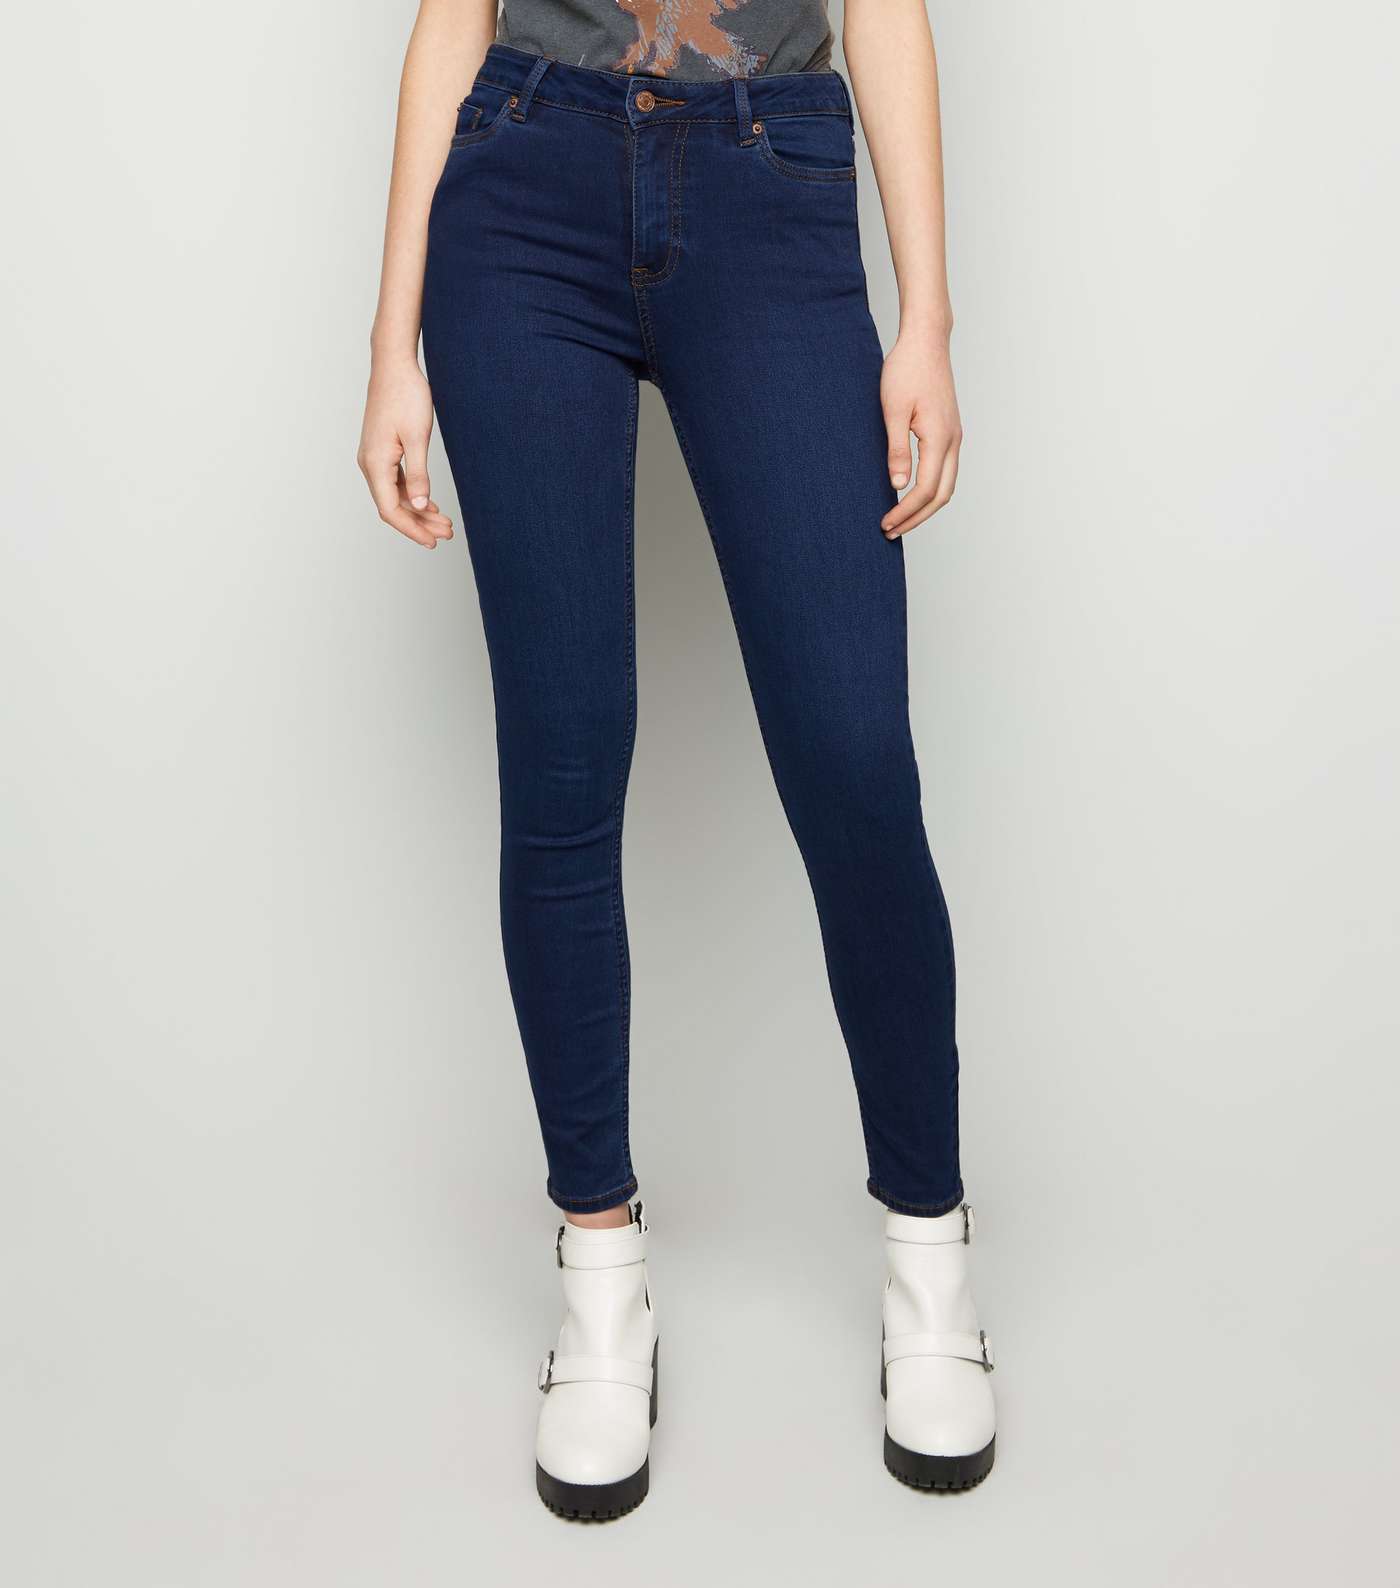 Blue Rinse Wash Mid Rise India Super Skinny Jeans Image 2